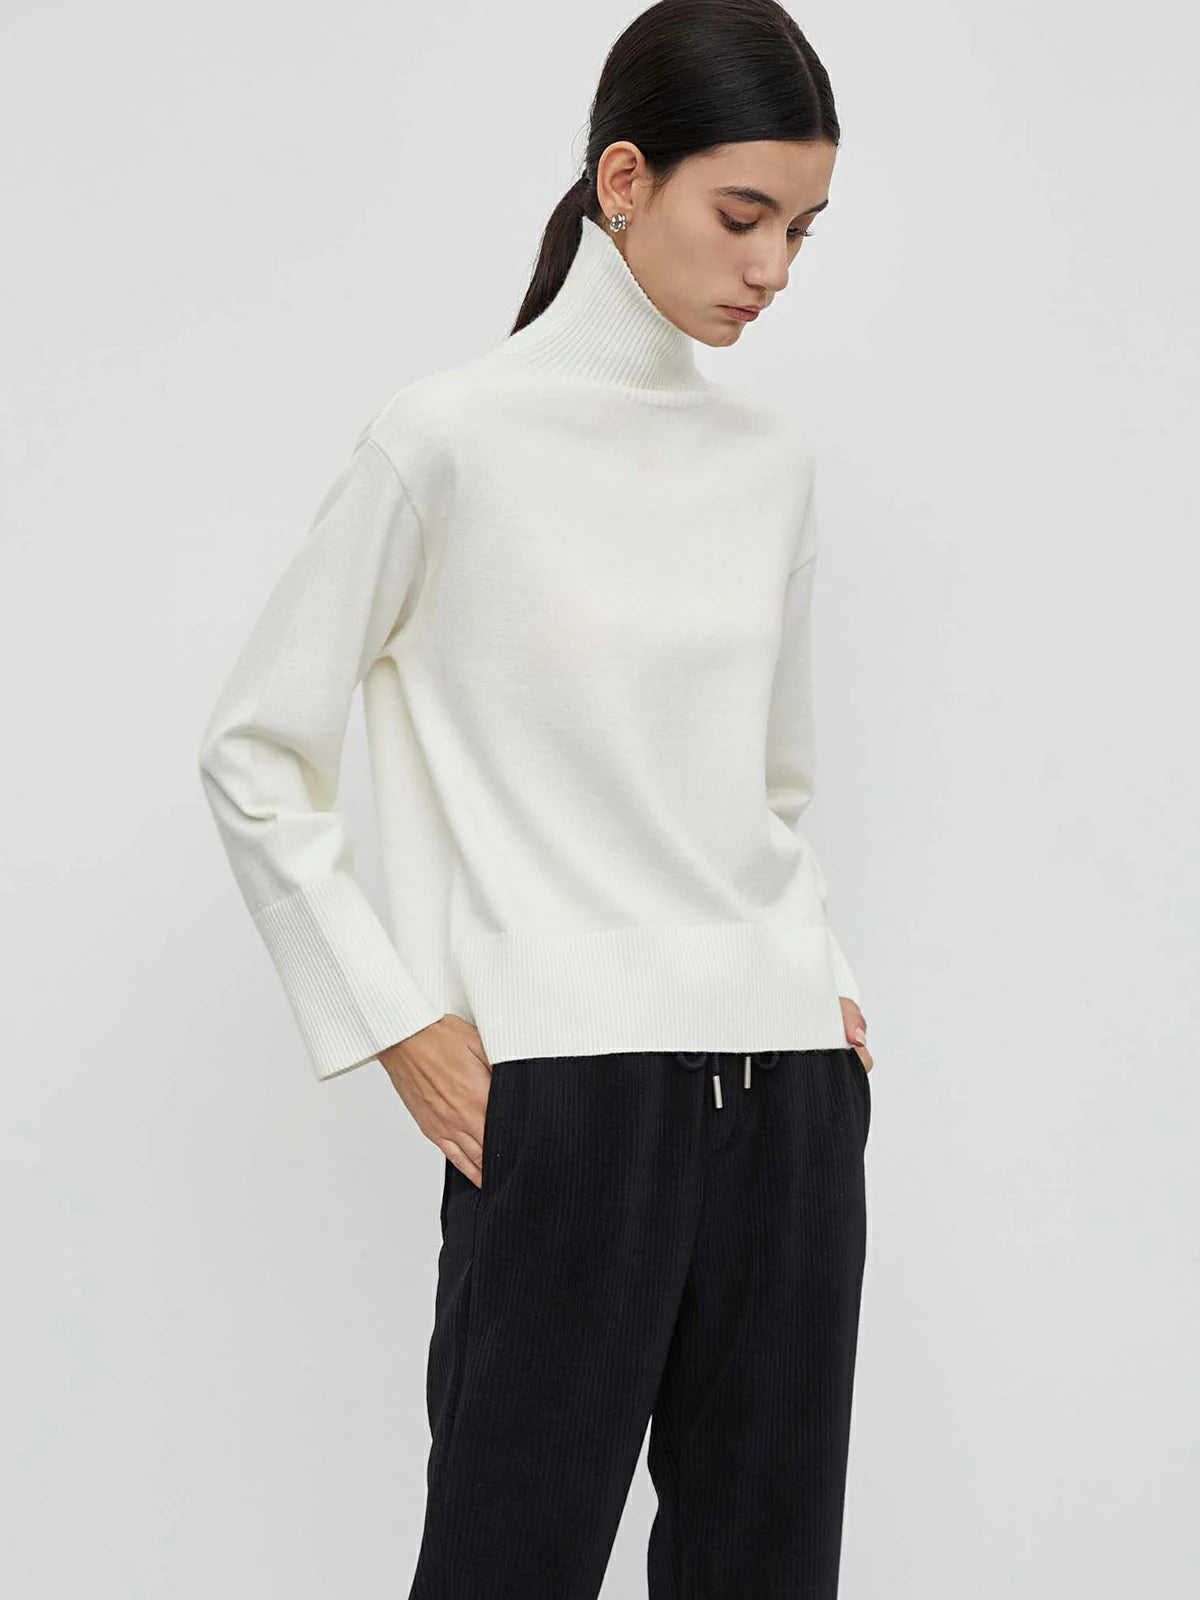 Classic White Turtleneck Knitwear Enhanced with Textured Ribbing